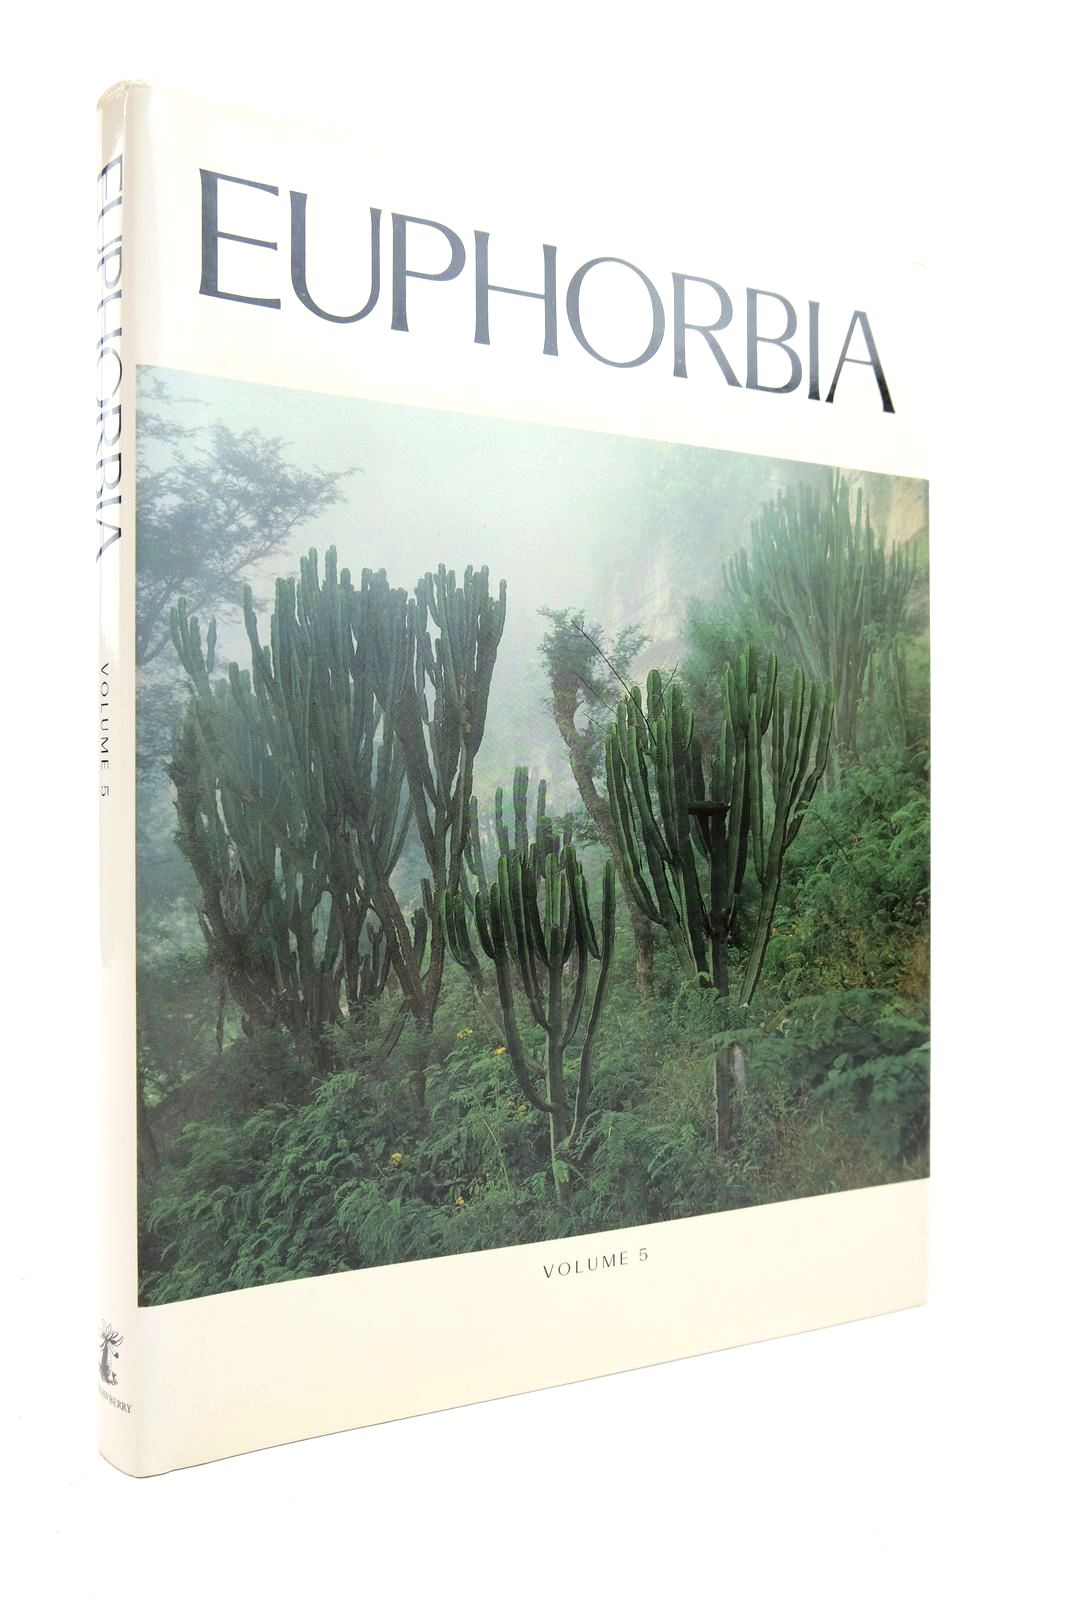 Photo of THE EUPHORBIA JOURNAL VOLUME V written by Kimberly, Michael J. Hunter, Mel Carter, Susan et al, published by Strawberry Press (STOCK CODE: 2139641)  for sale by Stella & Rose's Books